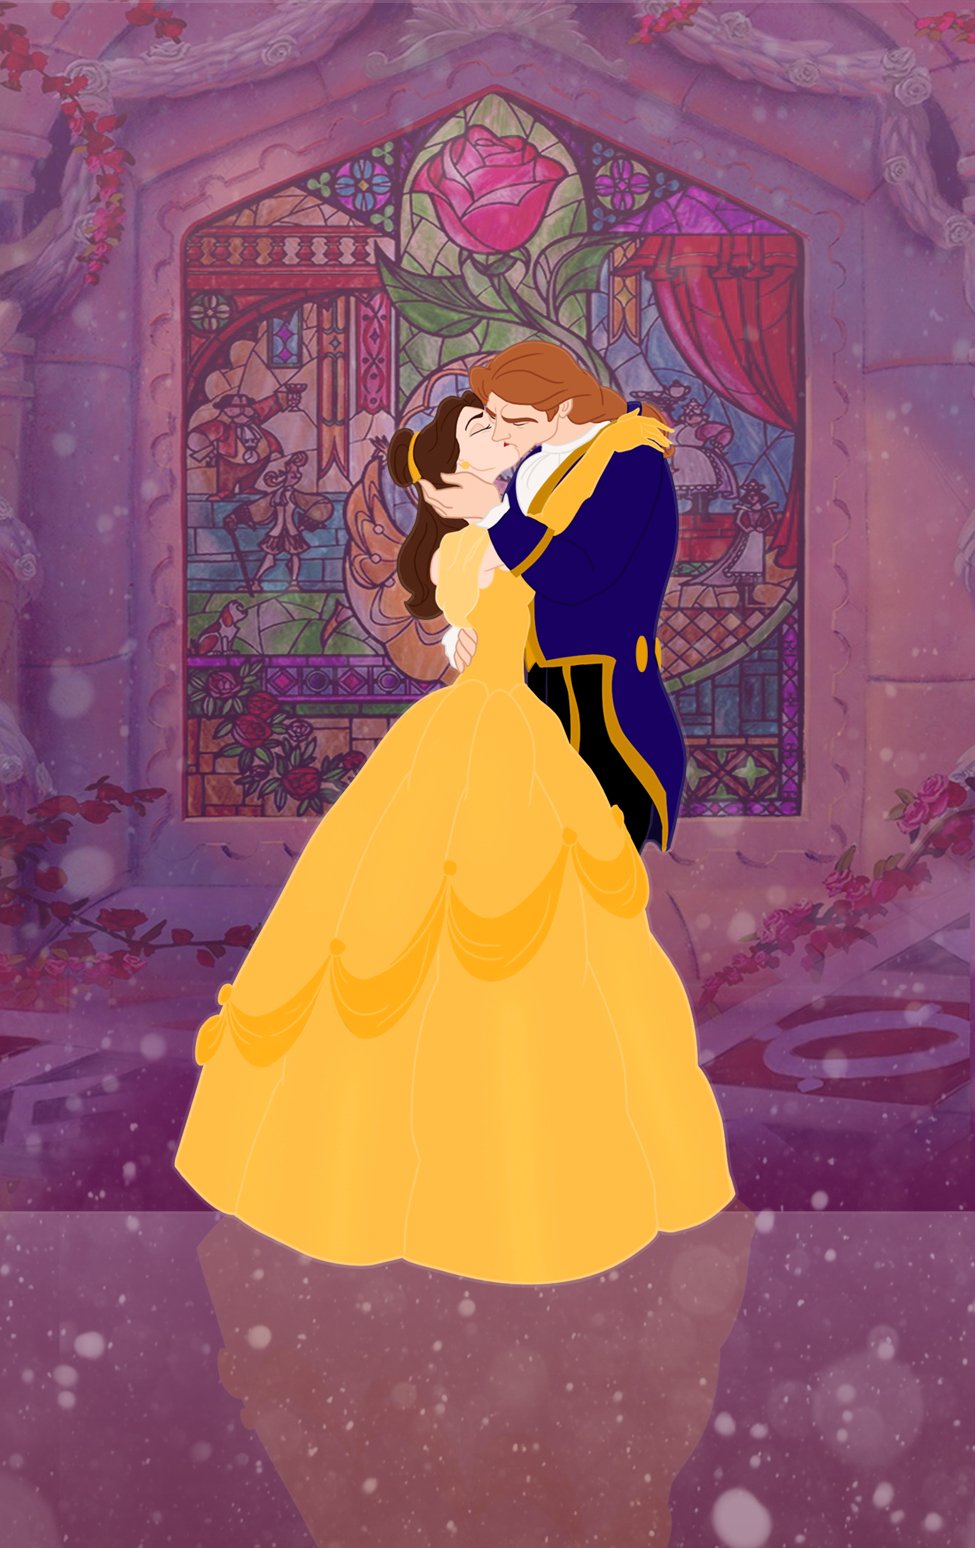 Tale as old as time